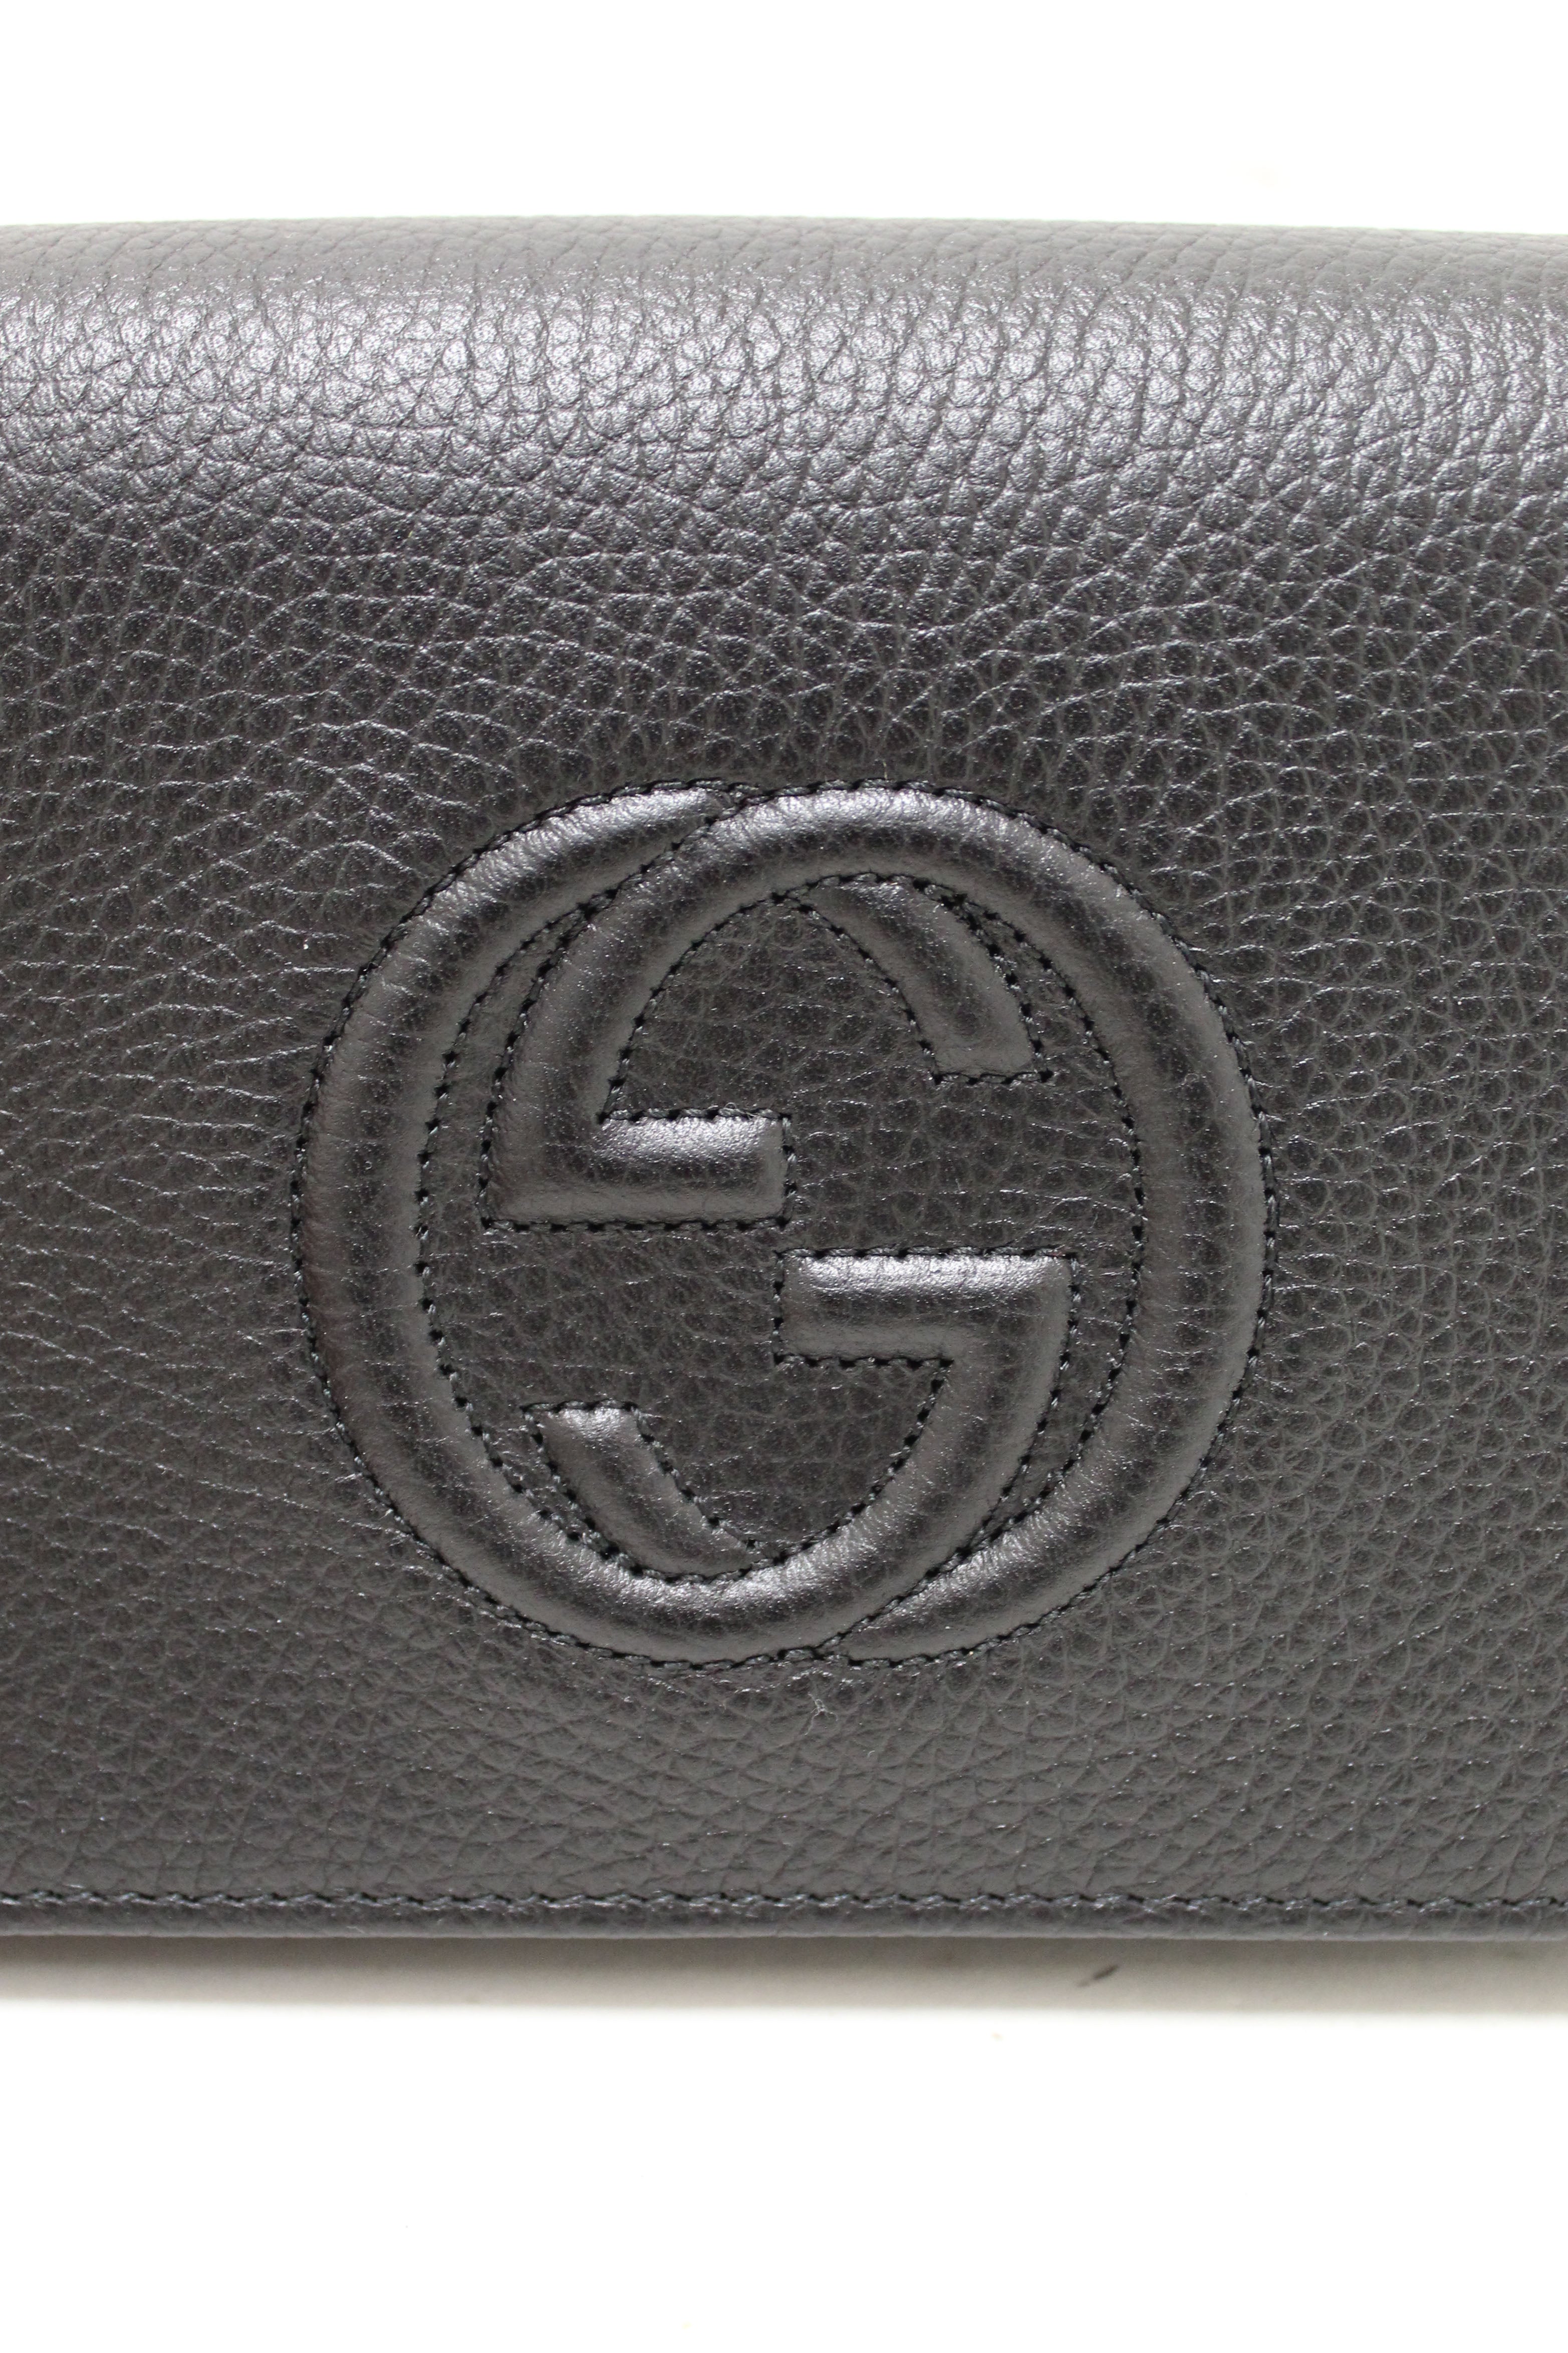 Authentic NEW Gucci Black Soho Disco Leather Wallet On Chain Cross Body Bag